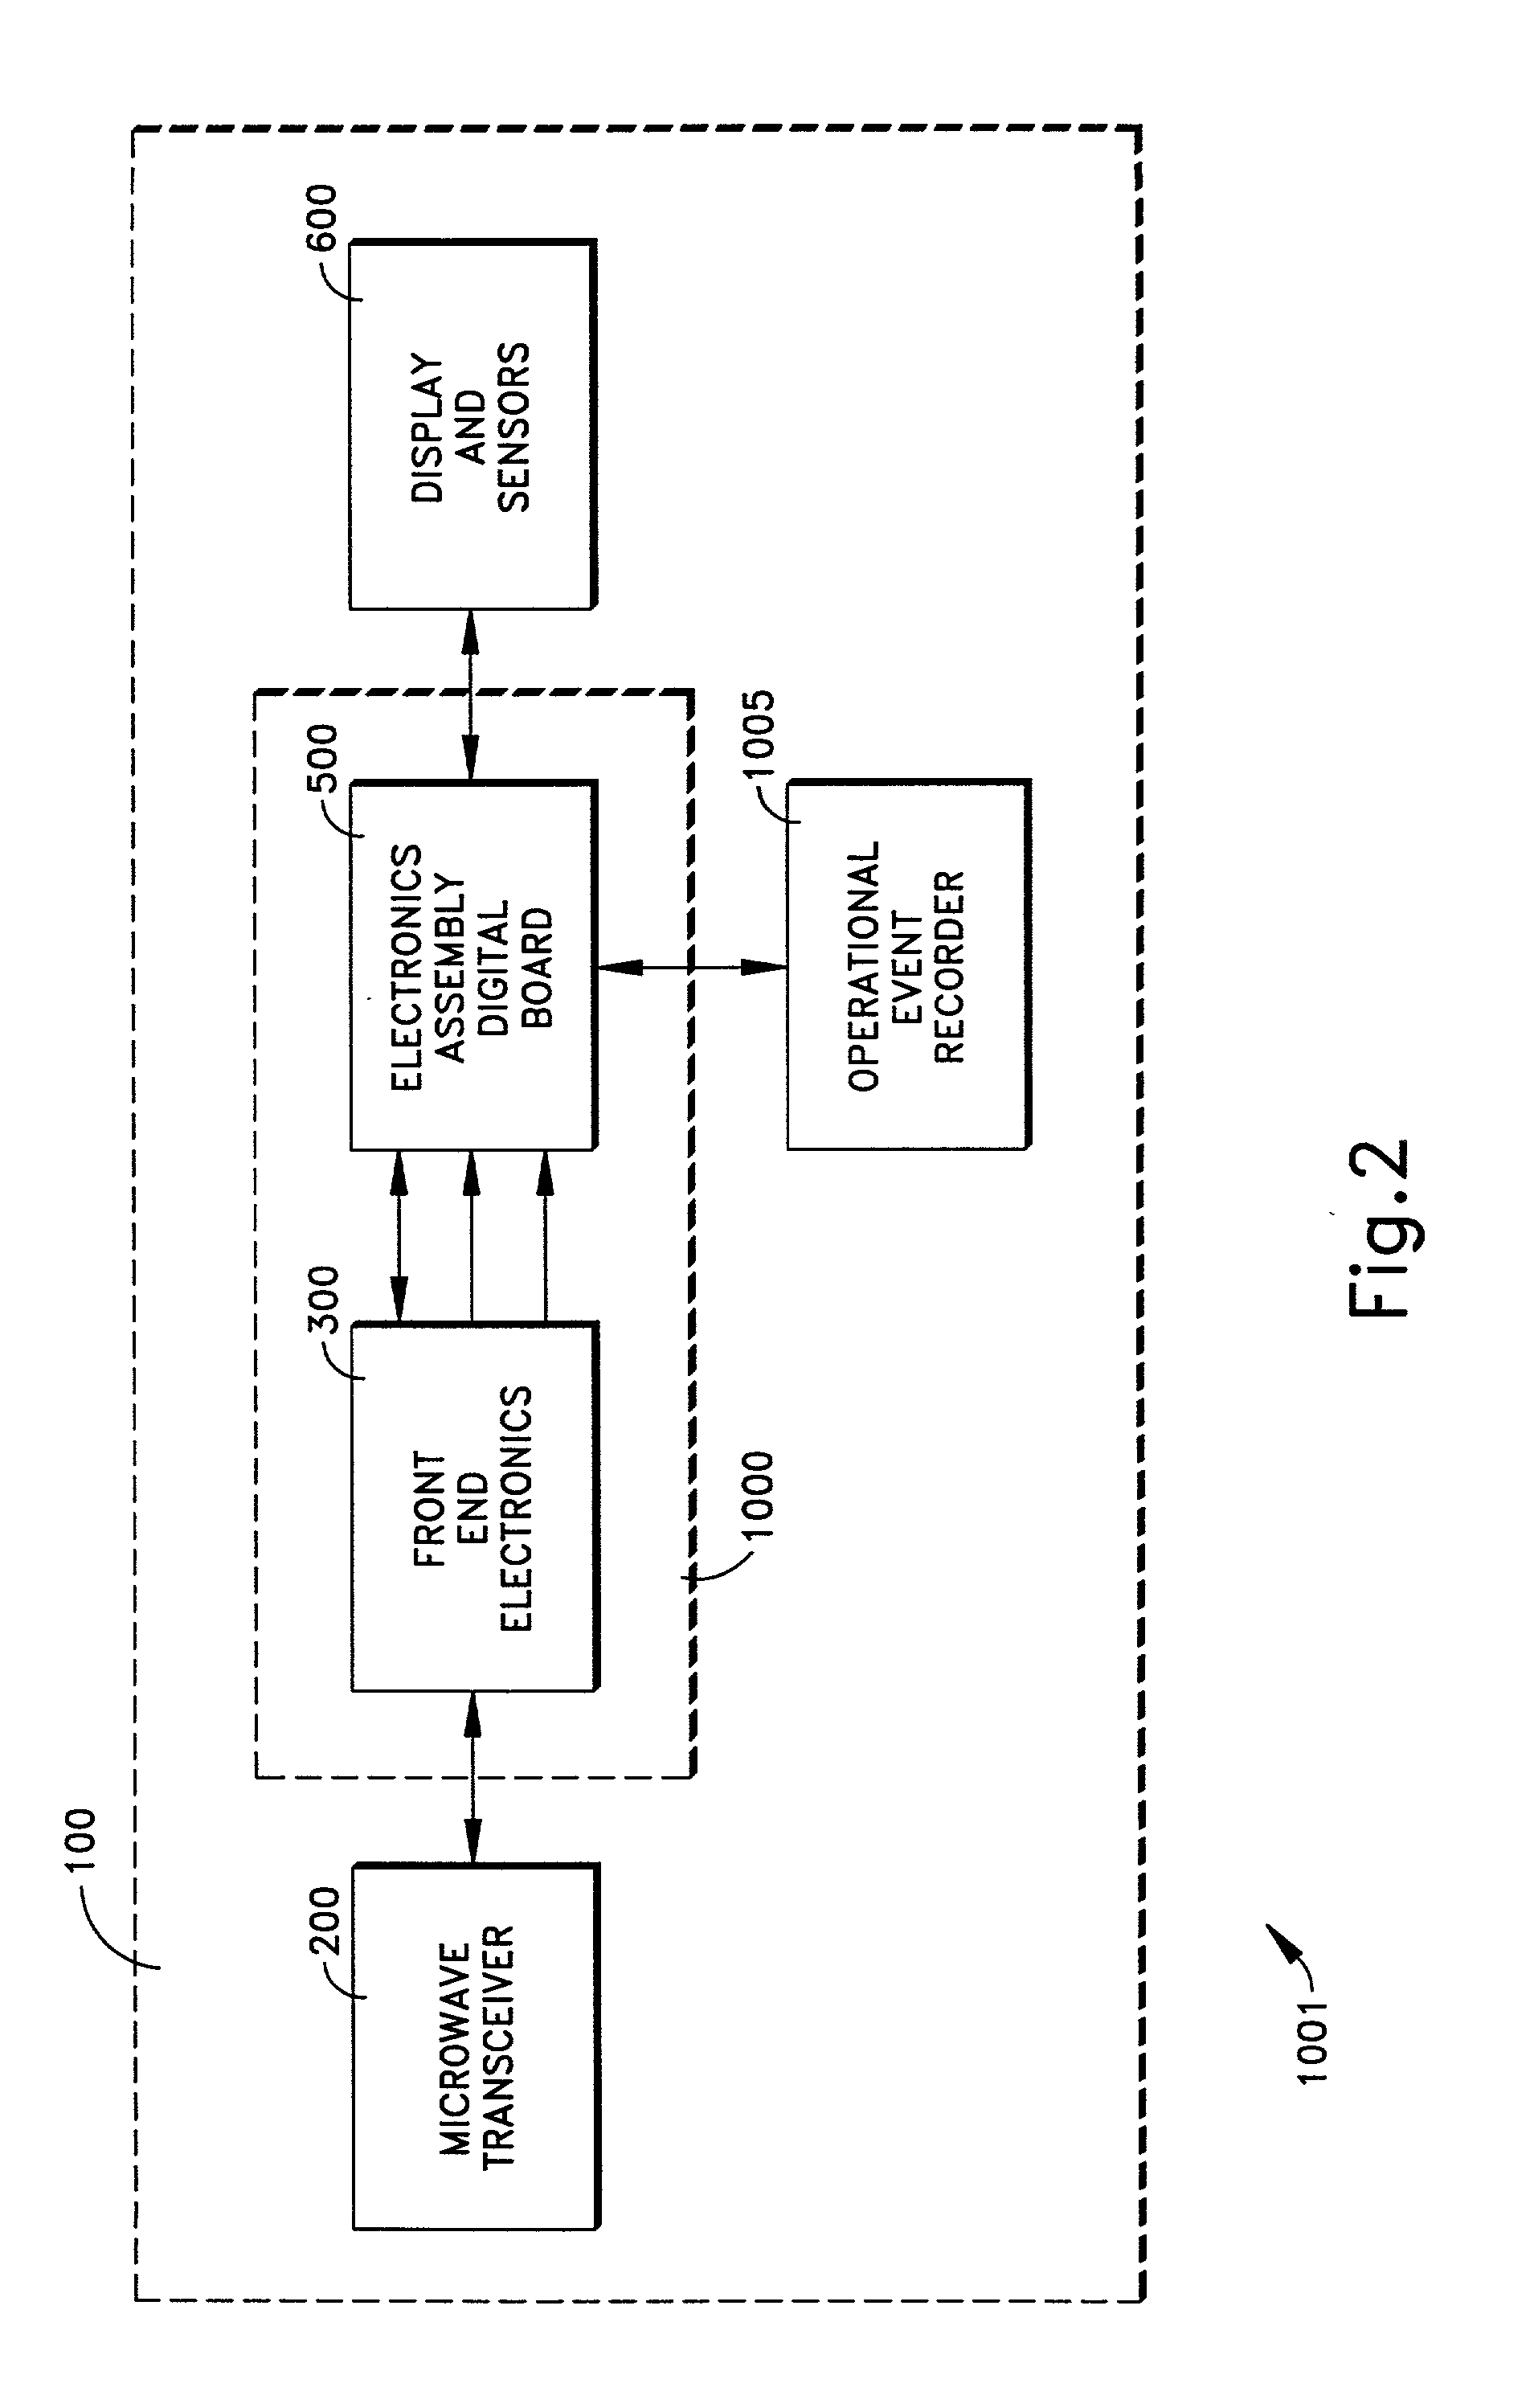 Apparatus and method for responding to the health and fitness of a driver of a vehicle